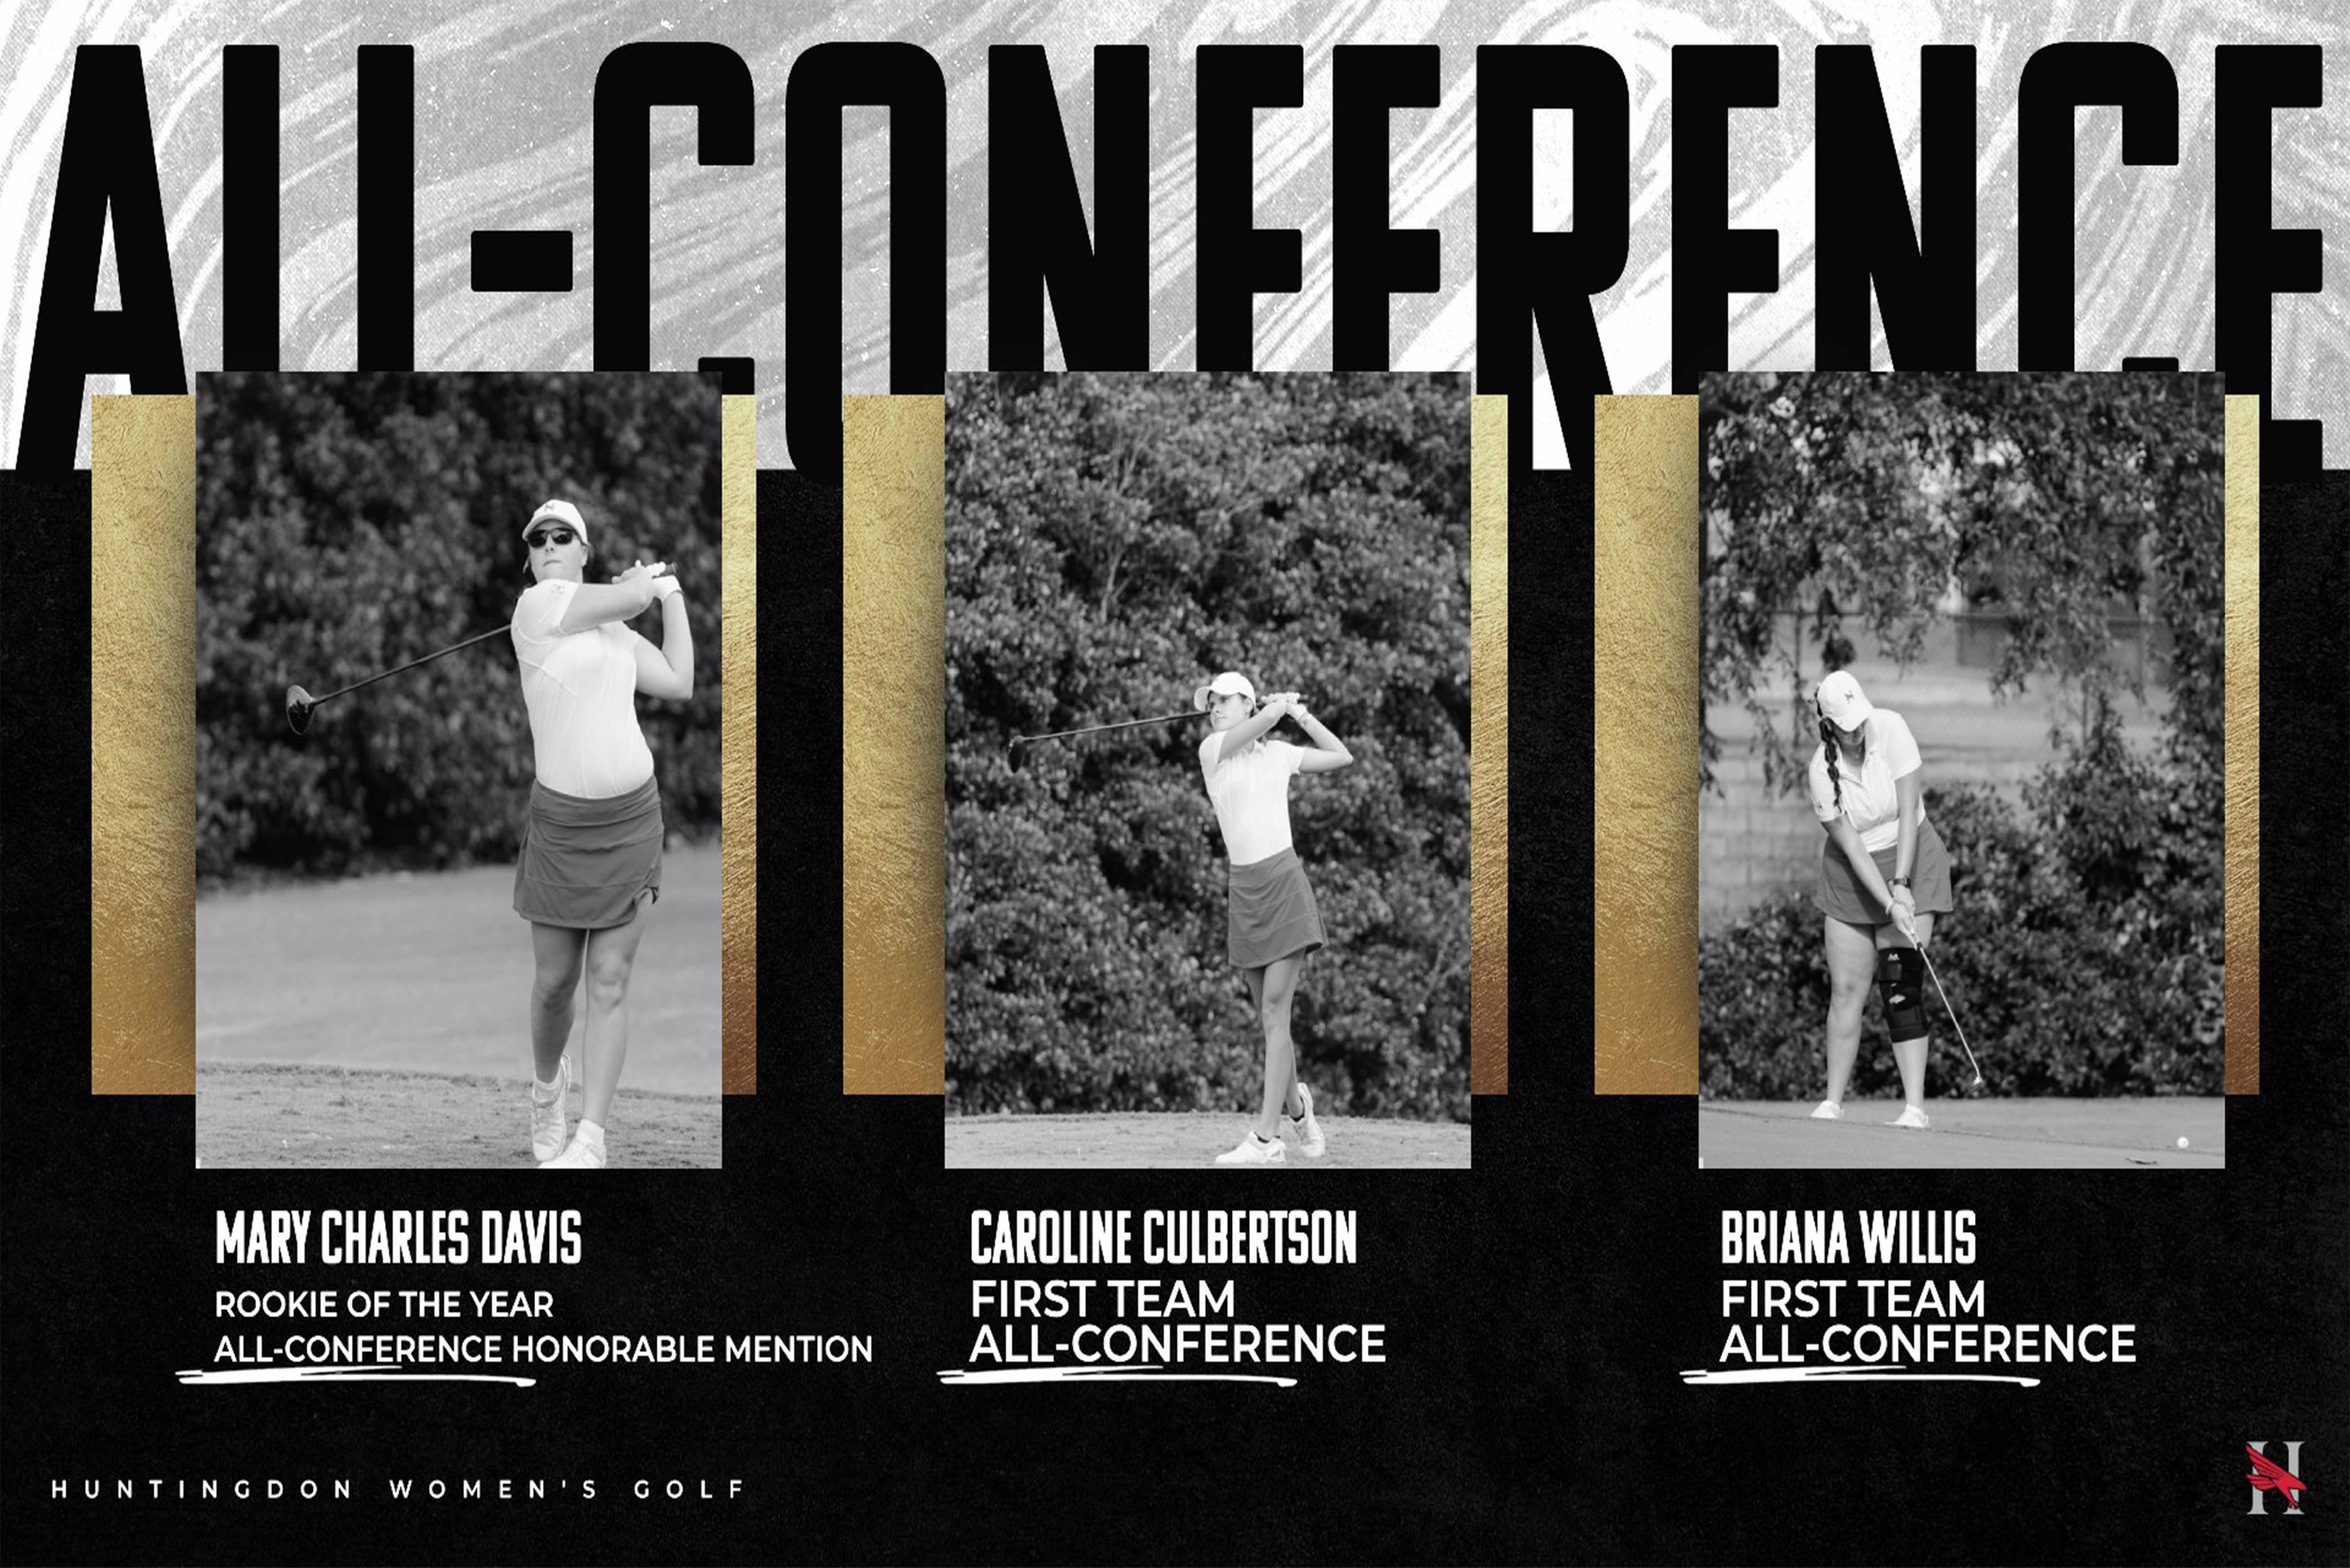 Mary Charles Davis Named USA South Rookie Of The Year, Culbertson and Willis Earn First Team All-Conference Honors